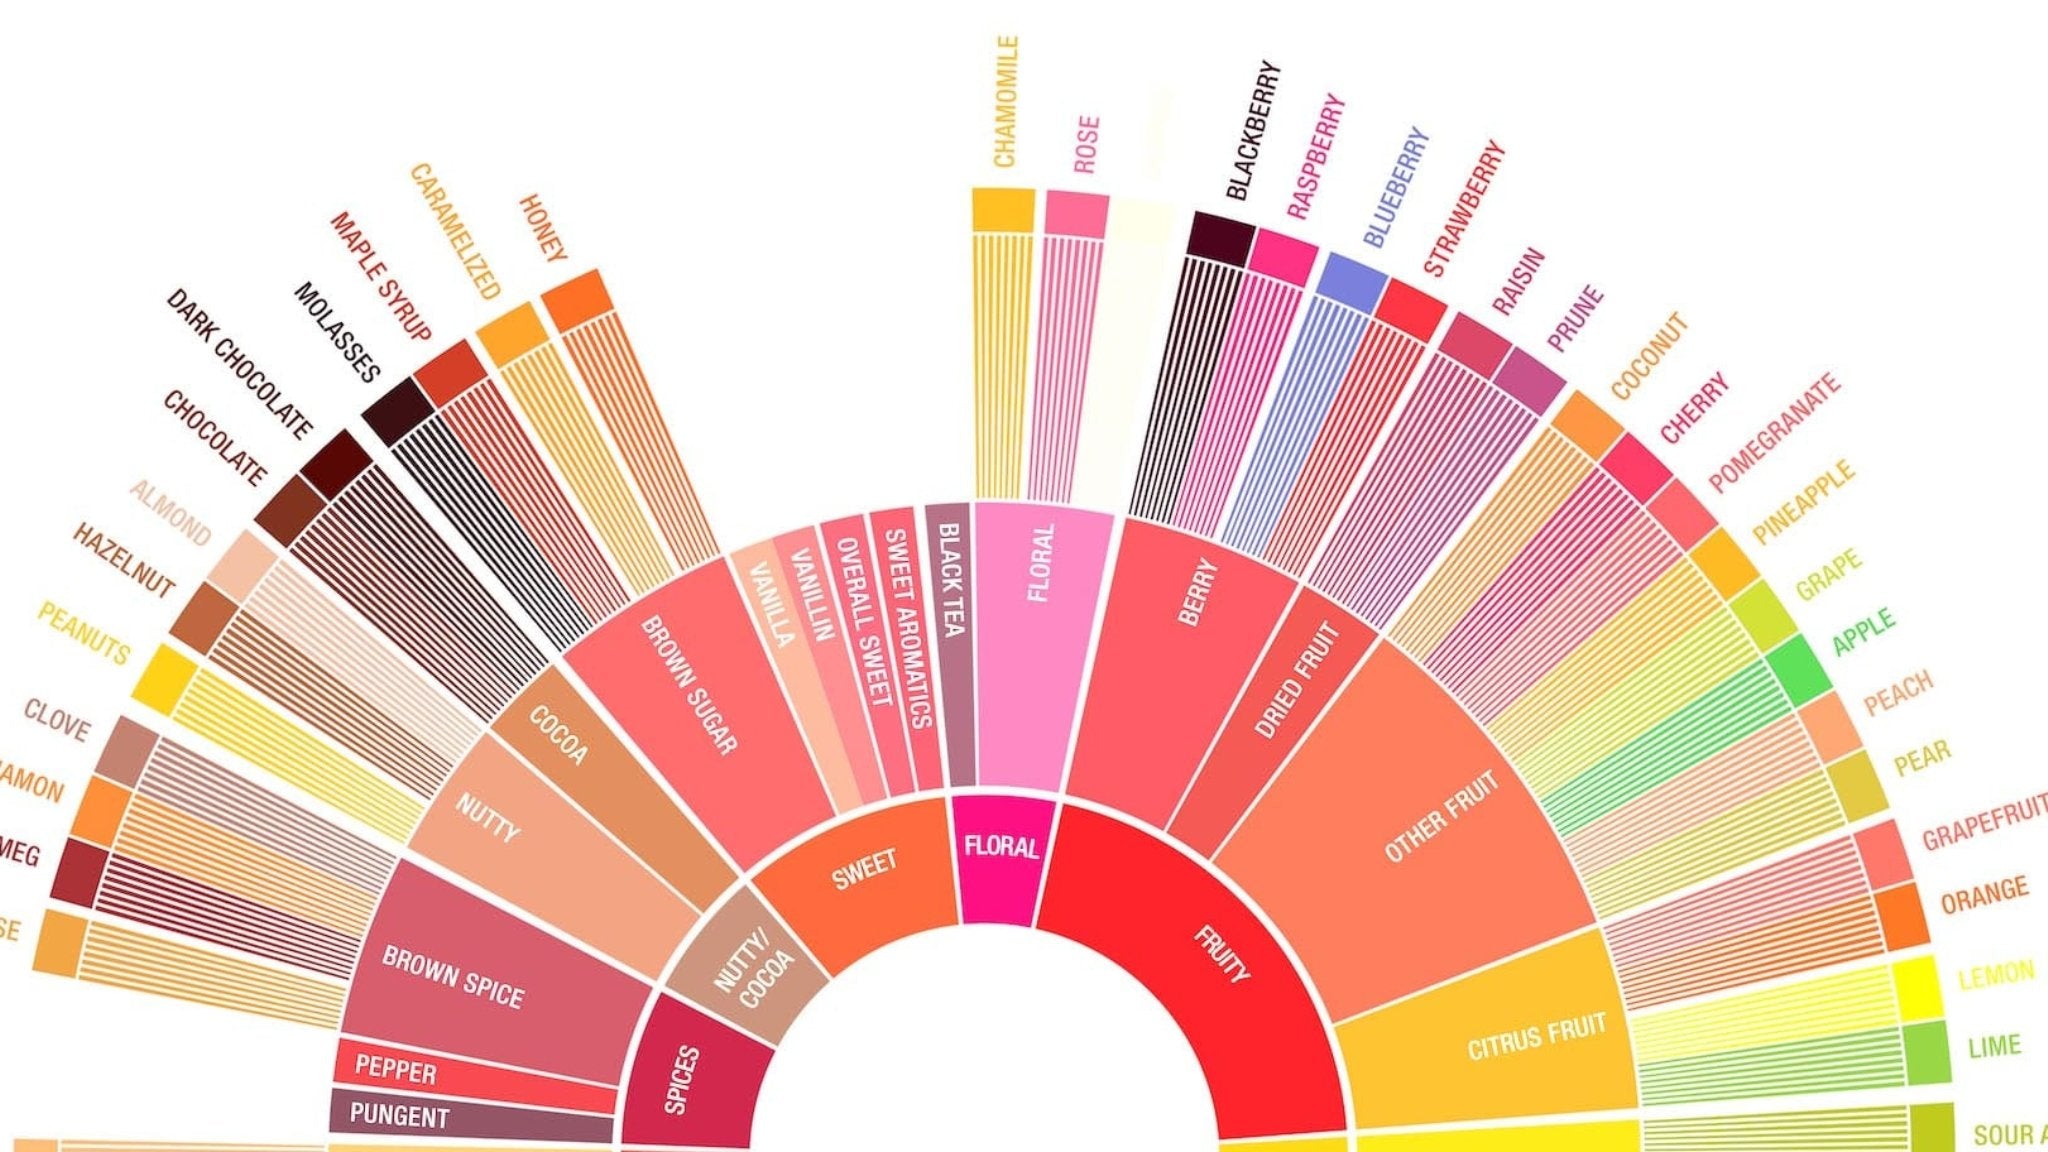 History of the Coffee Flavor Wheel - Seed to Bean